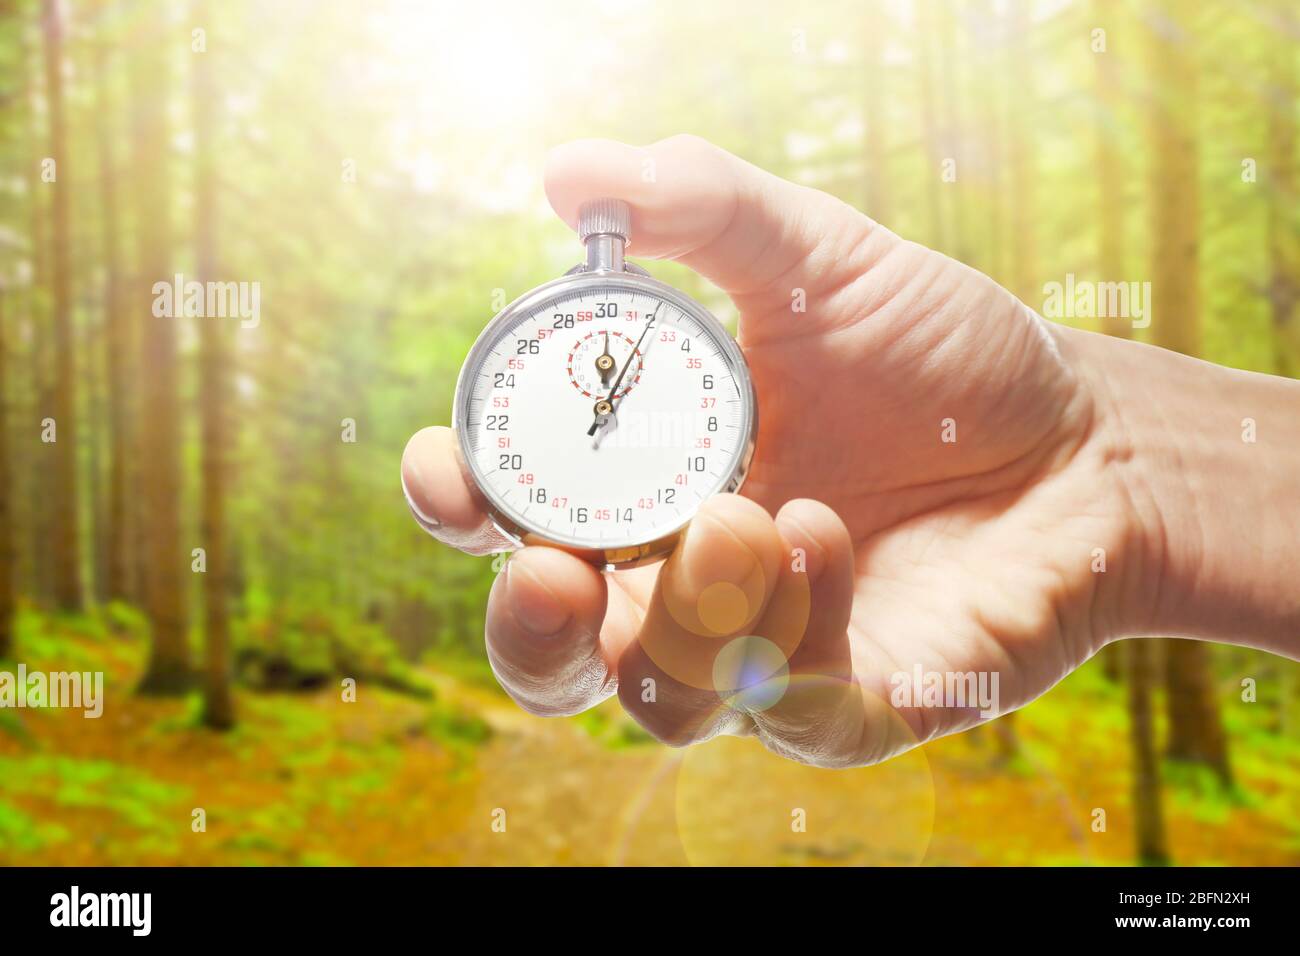 Man holding stopwatch against forest background.Time concept Stock Photo